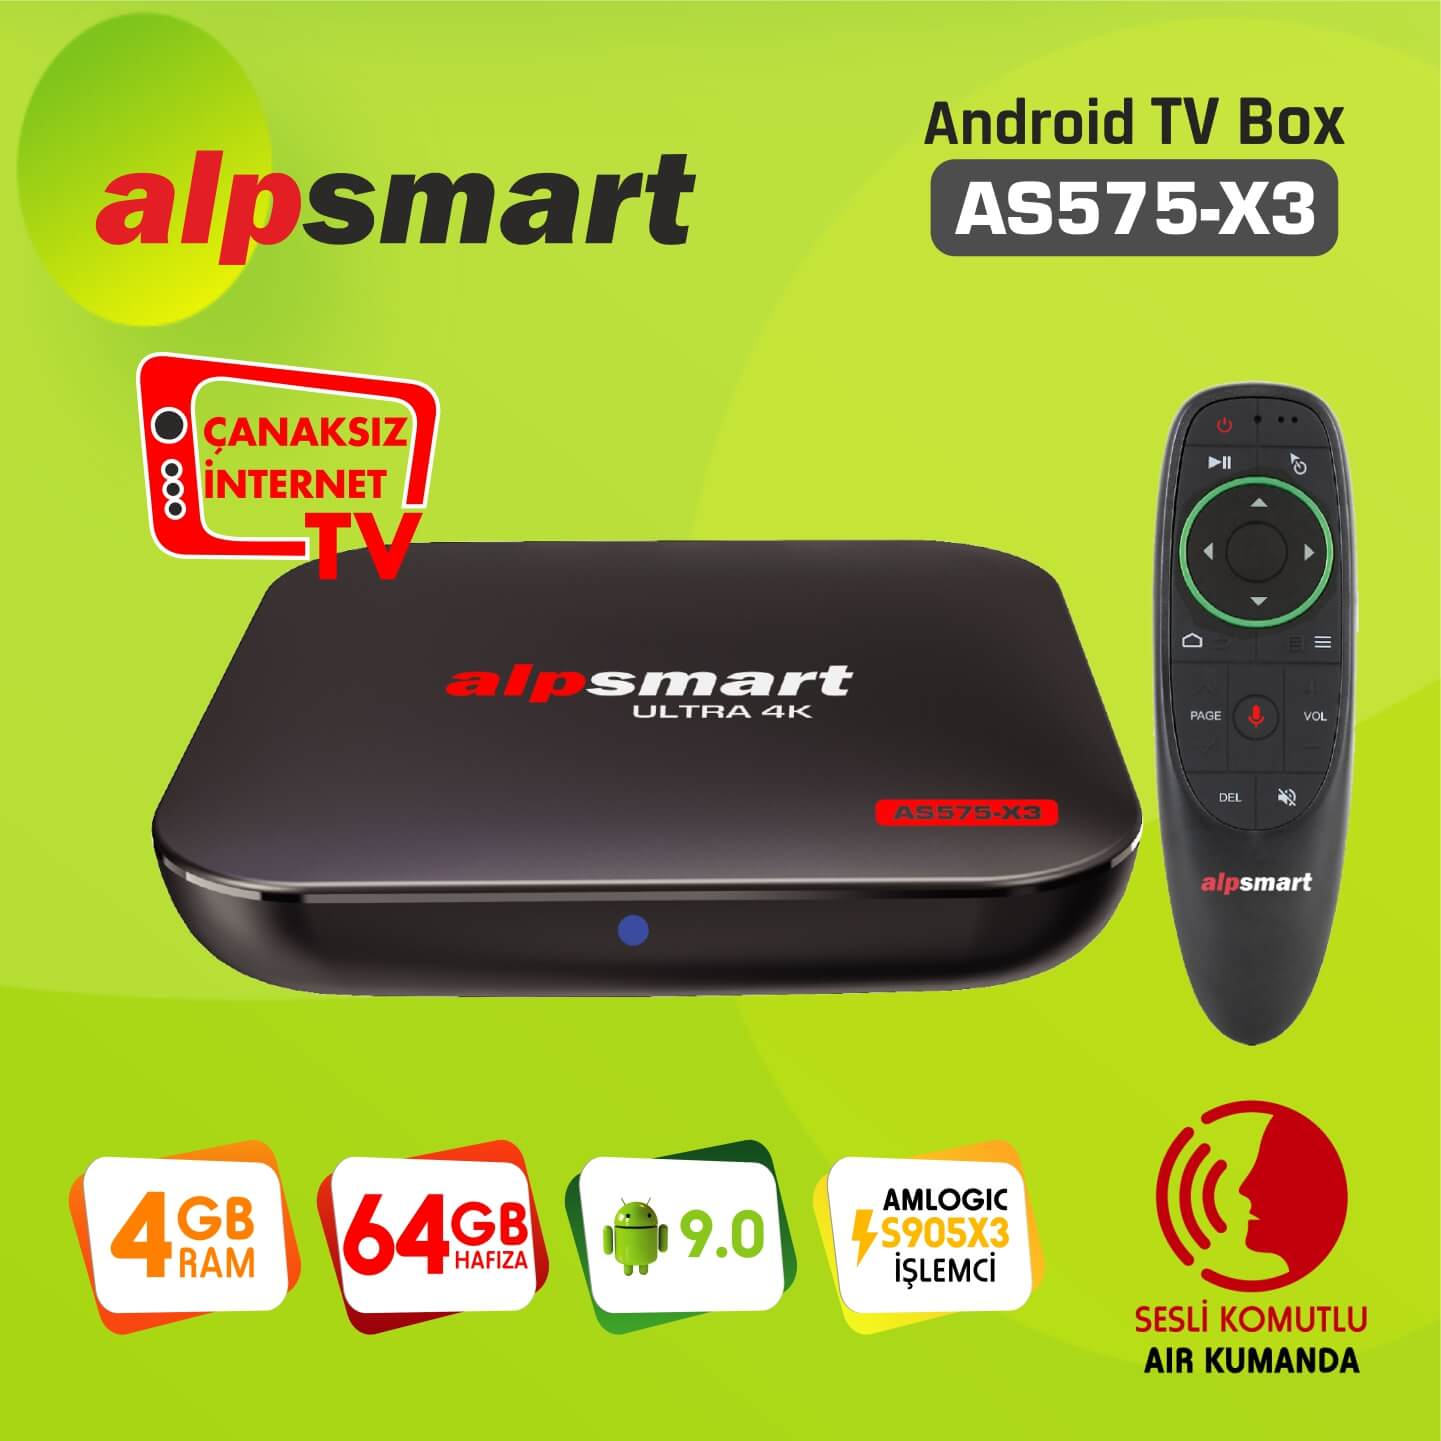 Alpsmart As575 X3 Android Tv Box 4G/64G